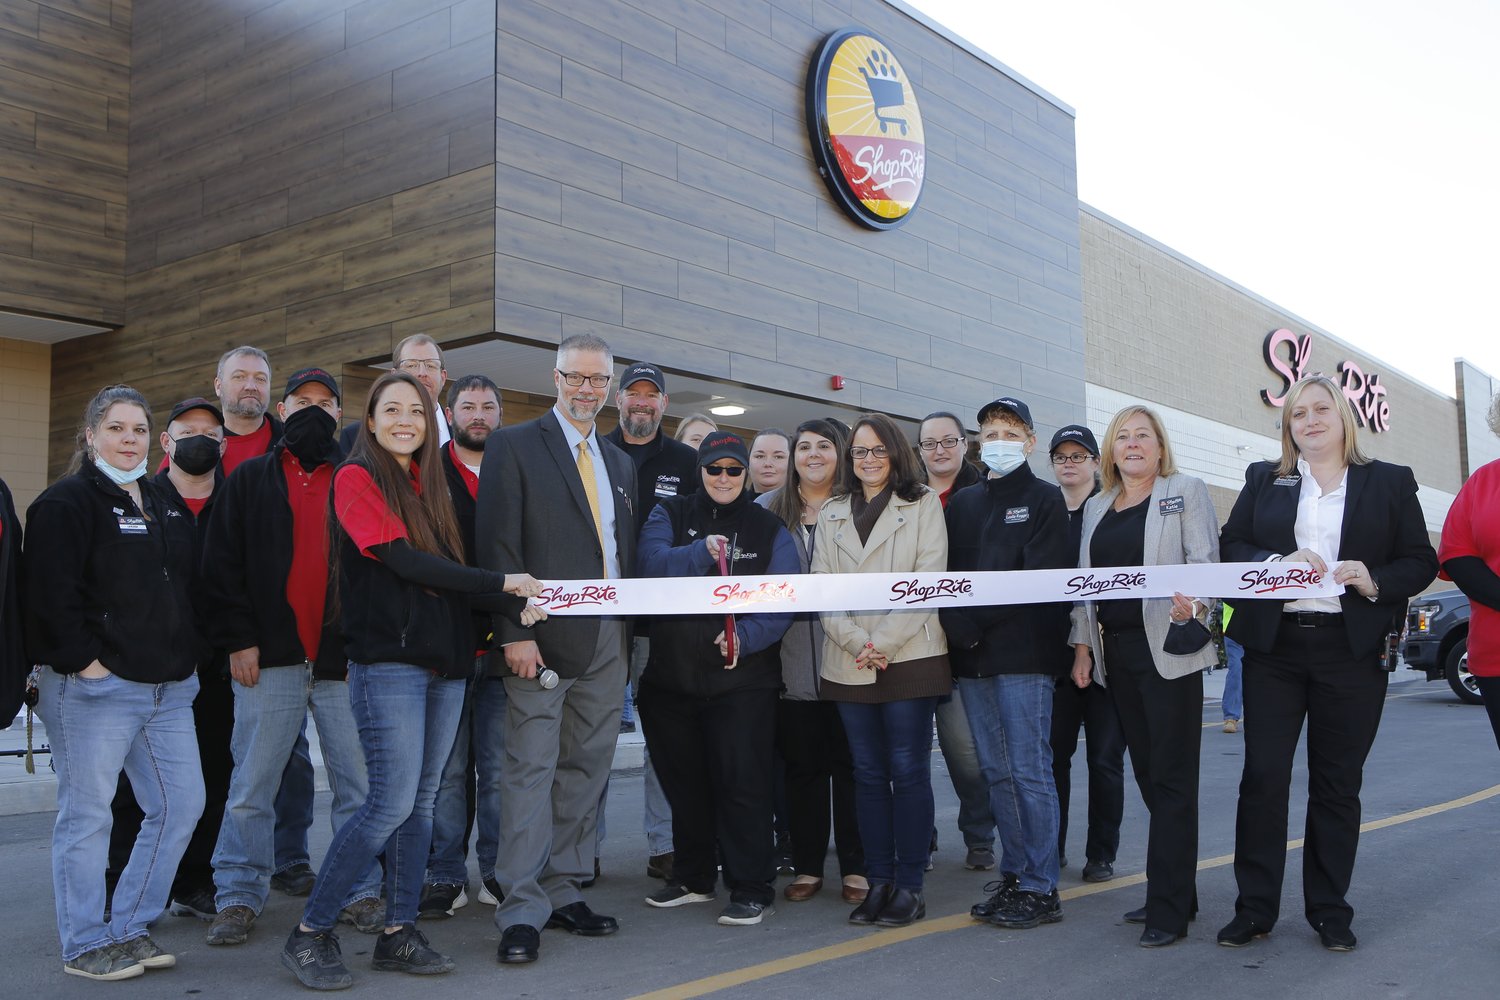 A November 7 ribbon cutting for the new ShopRite at Westfall Town Center celebrates the new state-of-the-art full-service supermarket.